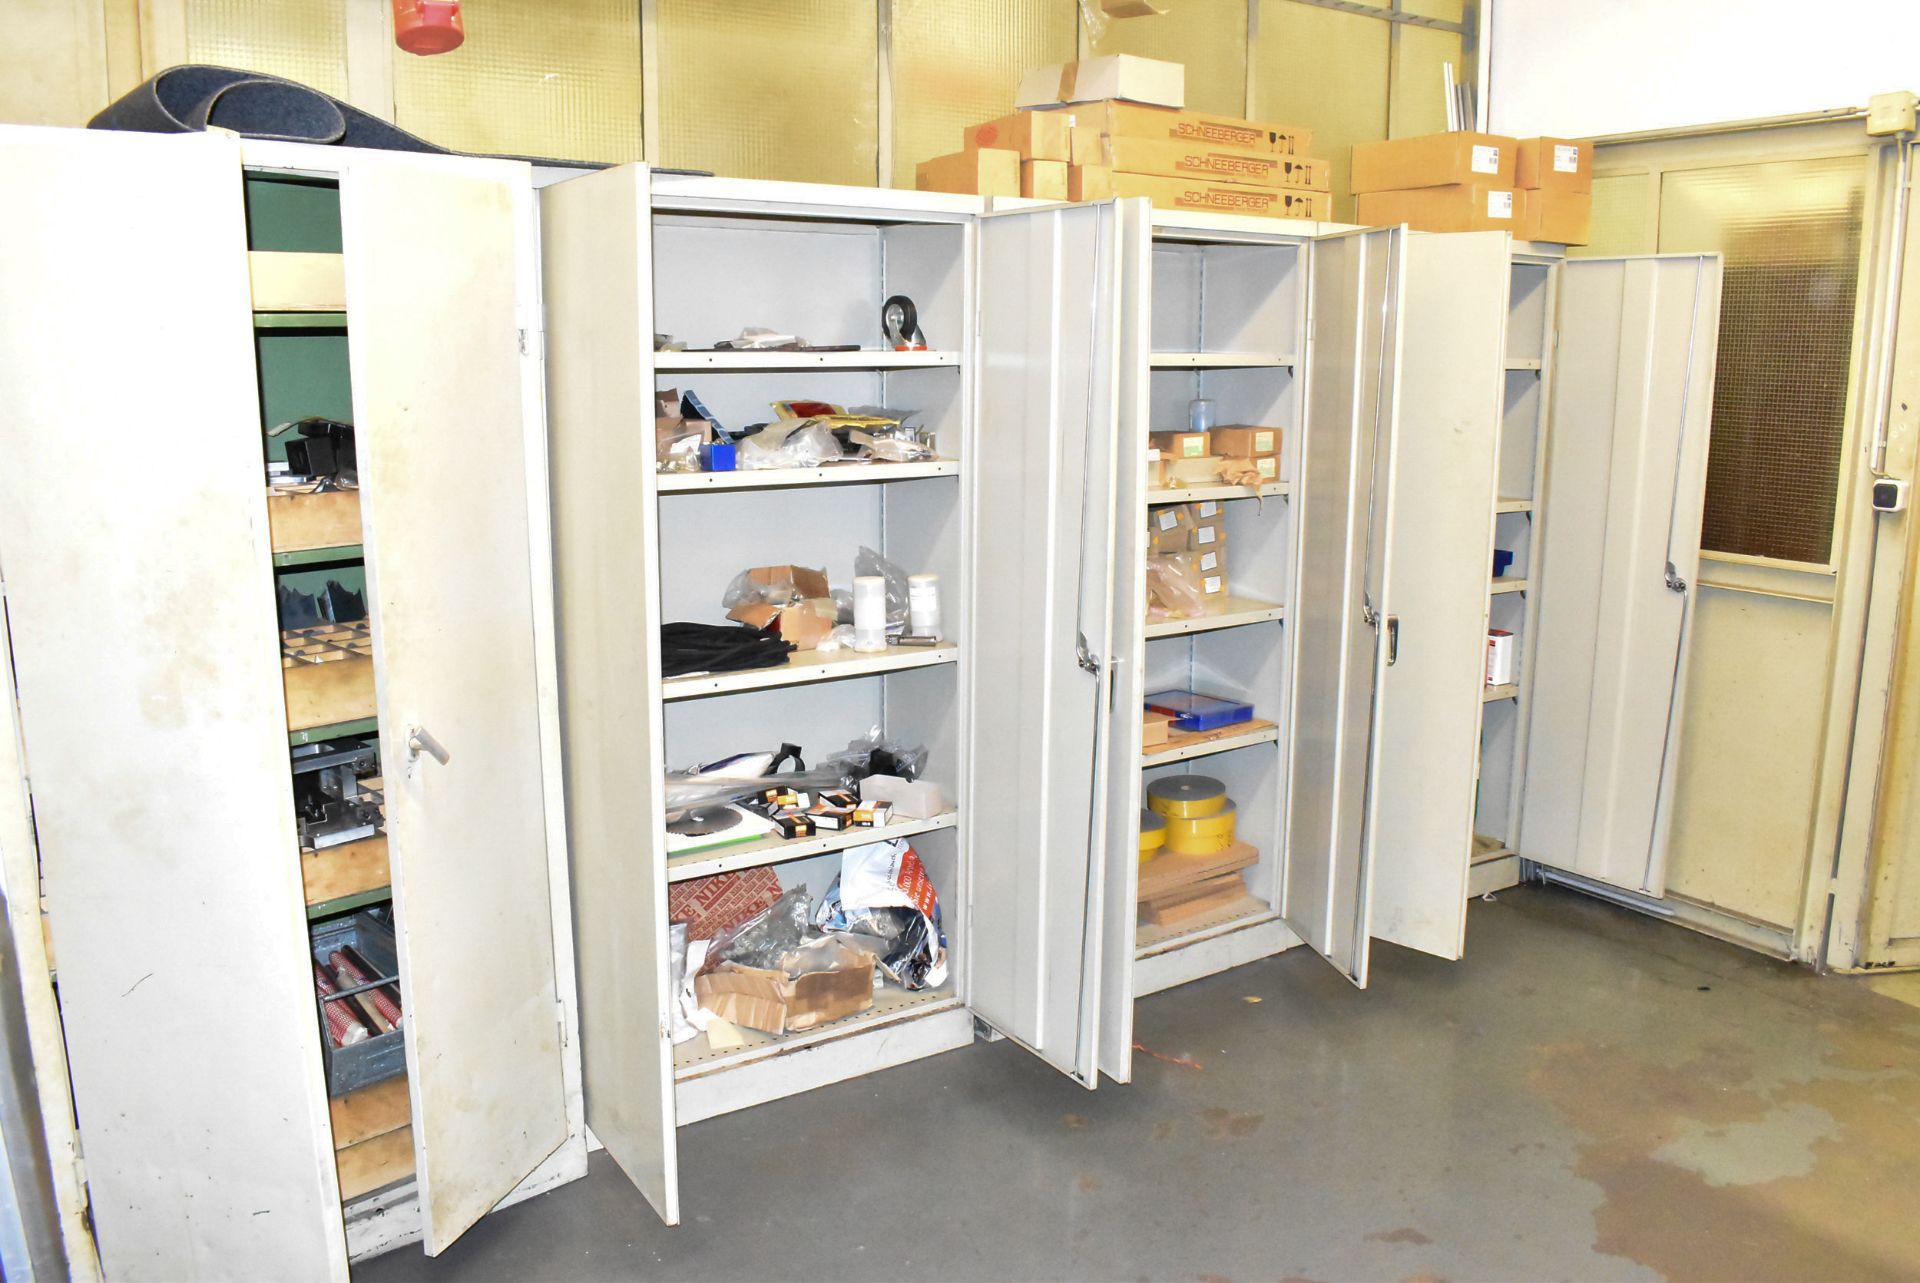 LOT/ CONTENTS OF ROOM - PARTS AND R&D COMPONENTS WITH CABINETS (BUILDING SERVICES AND FIXED ITEMS - Image 3 of 5